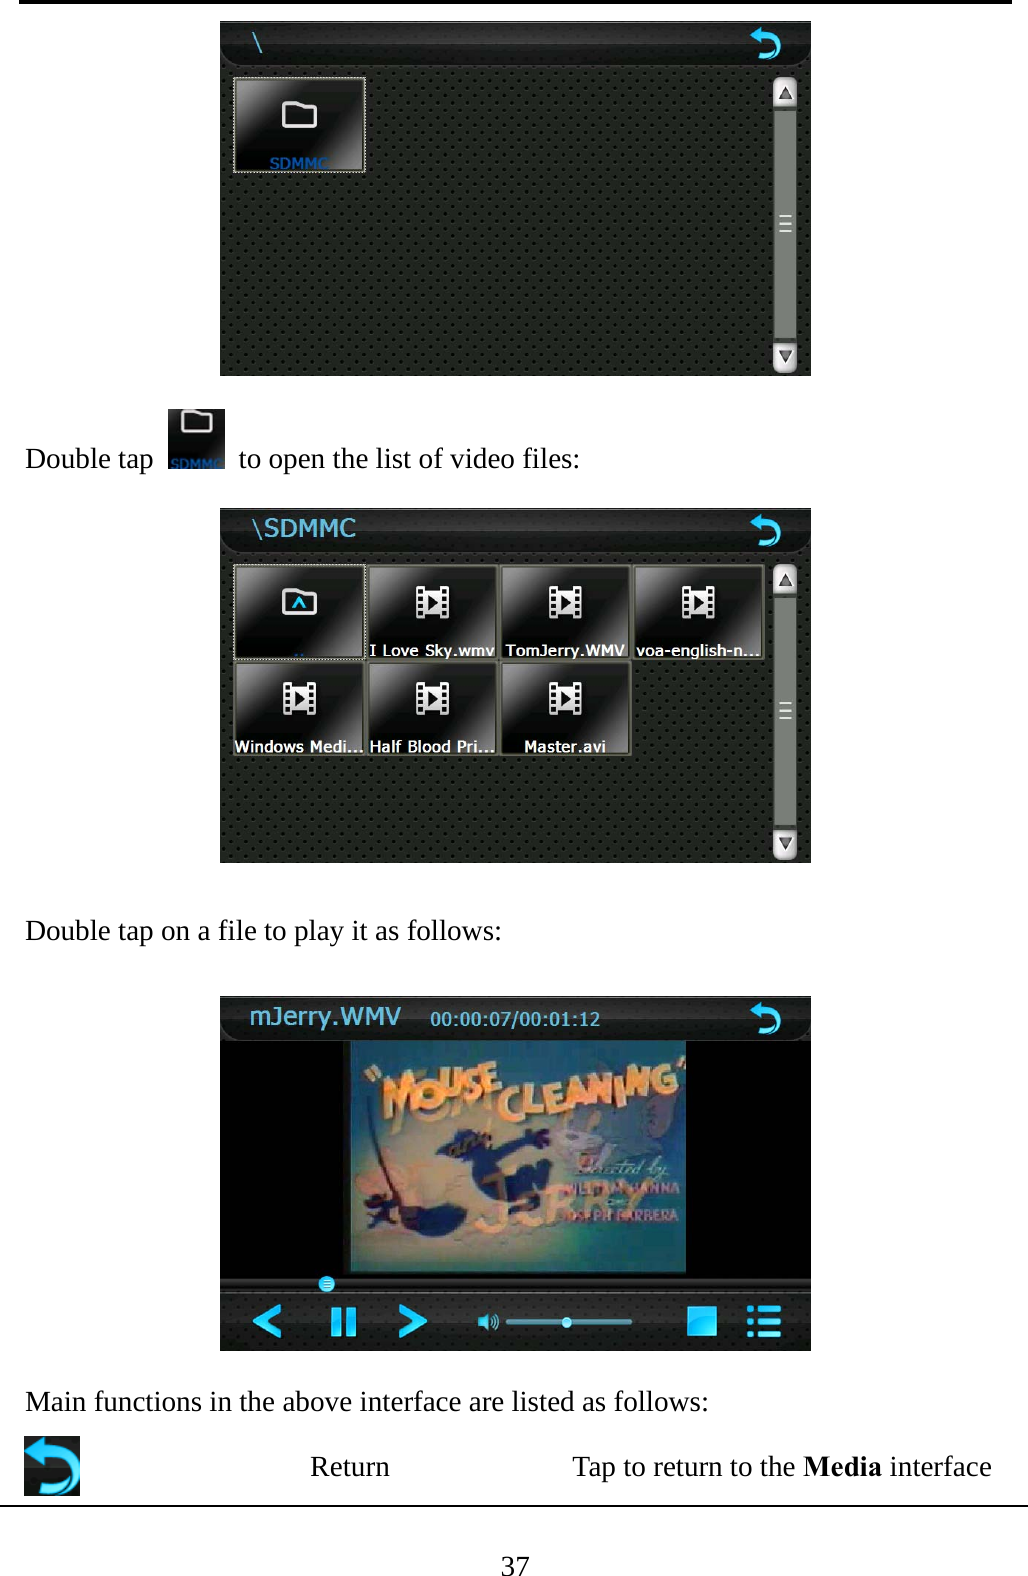  37  Double tap    to open the list of video files:  Double tap on a file to play it as follows:  Main functions in the above interface are listed as follows:  Return  Tap to return to the Media interface 